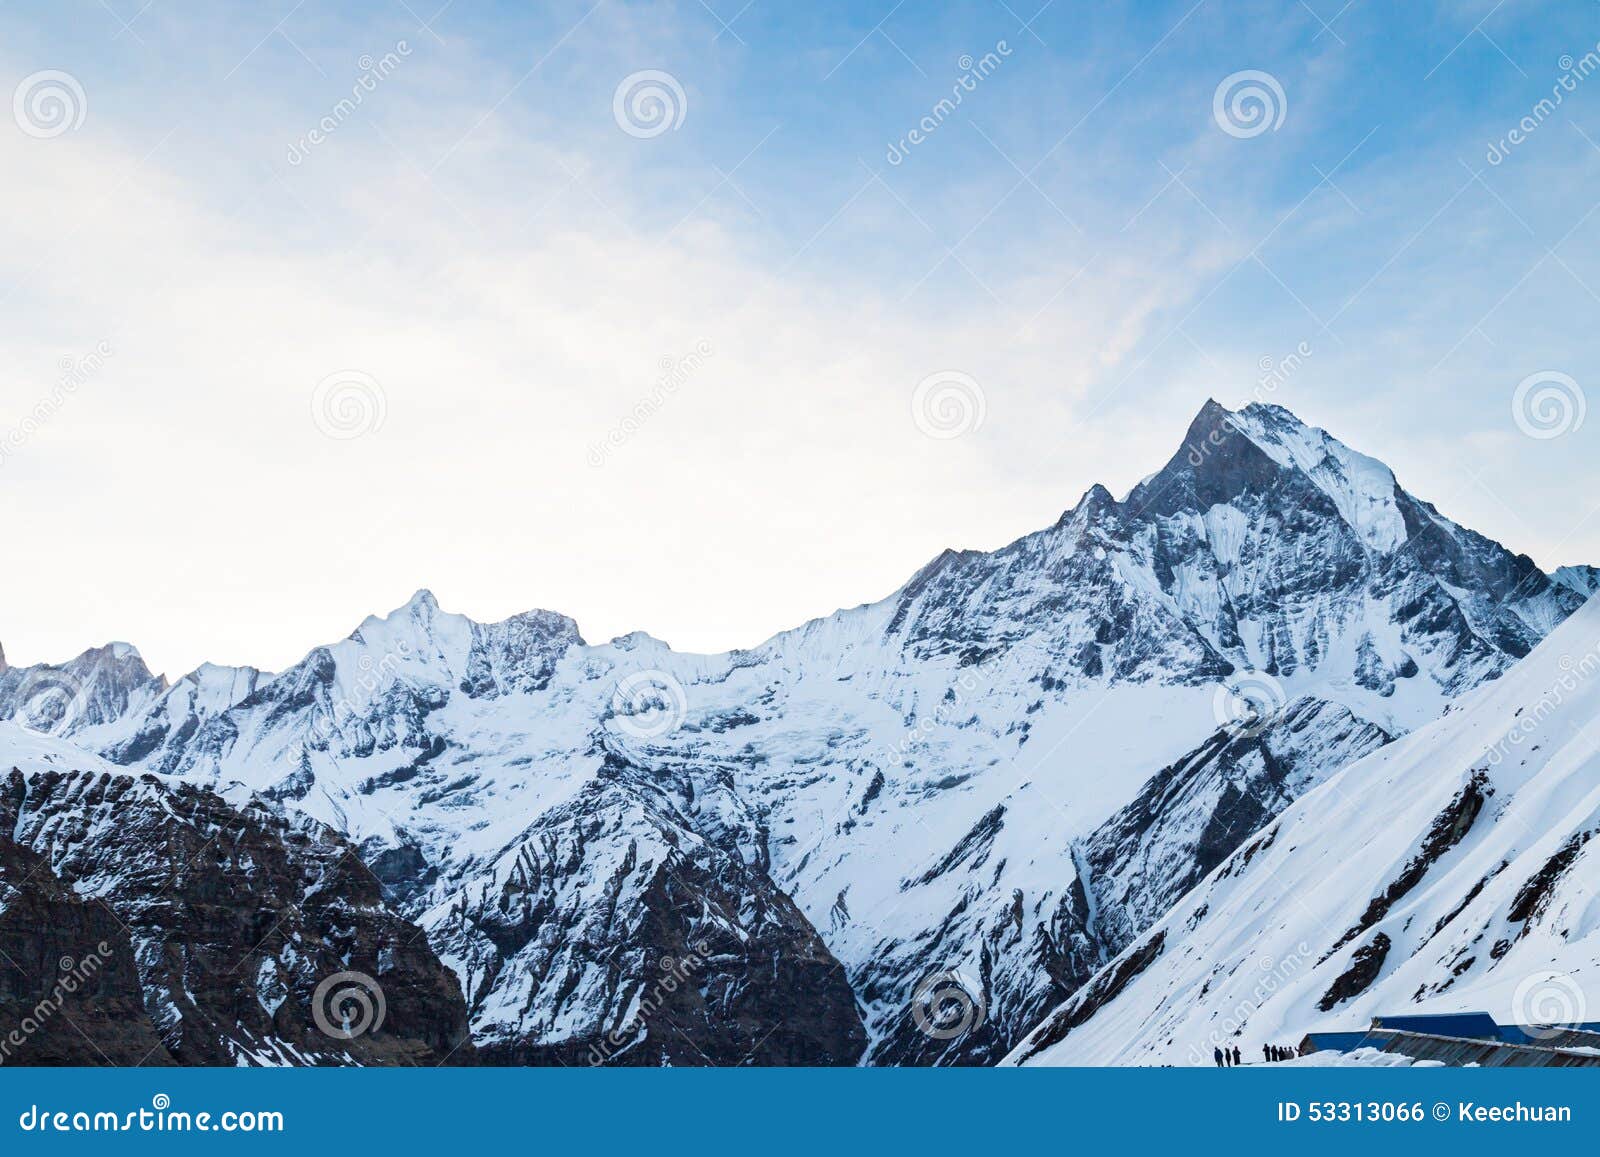 peak of mount machapuchare or popularly known as fish tail with the annapurna base camp beneath